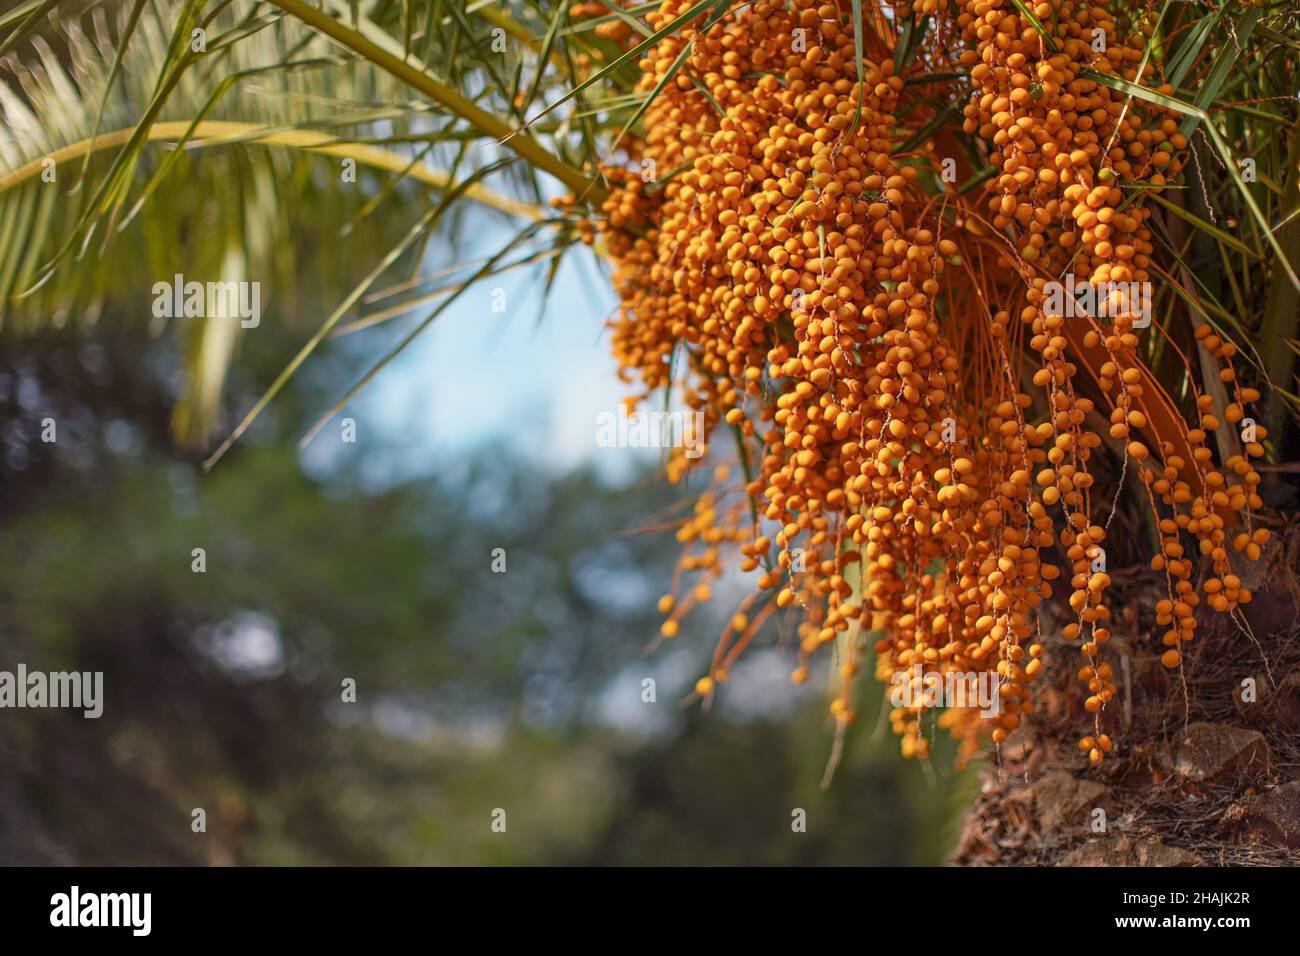 Pindo jelly palm (butia capitata) yellow fruits hanging from a tree Stock Photo